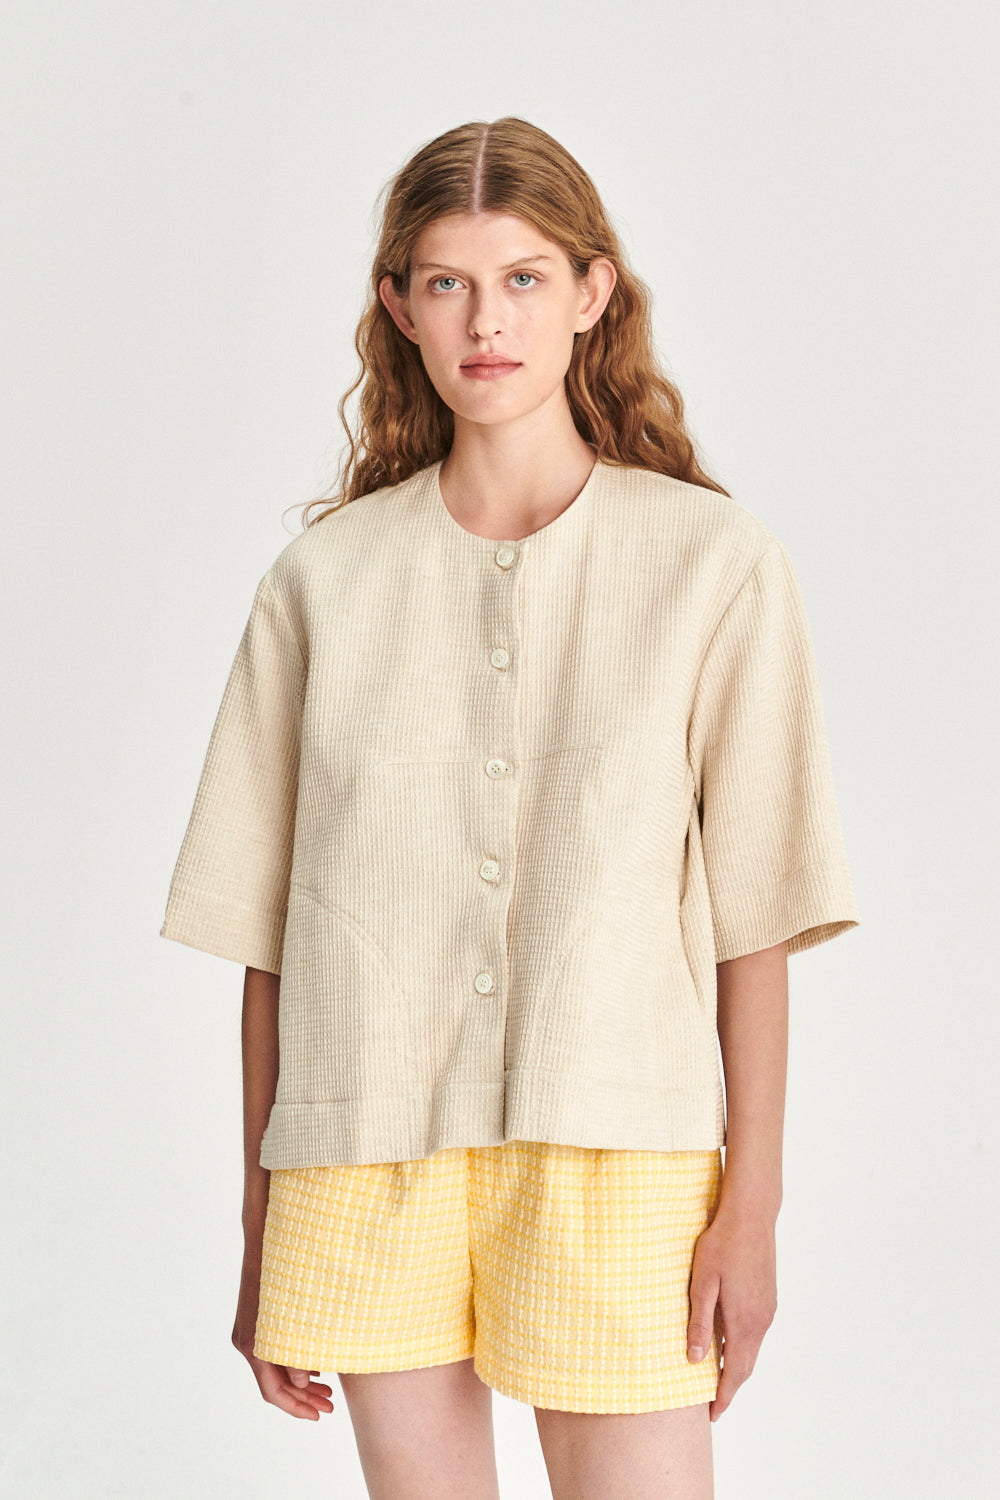 Collarless Relaxed Jacket Shirt in a Light Beige Structural Waffled Japanese Cotton and Linen